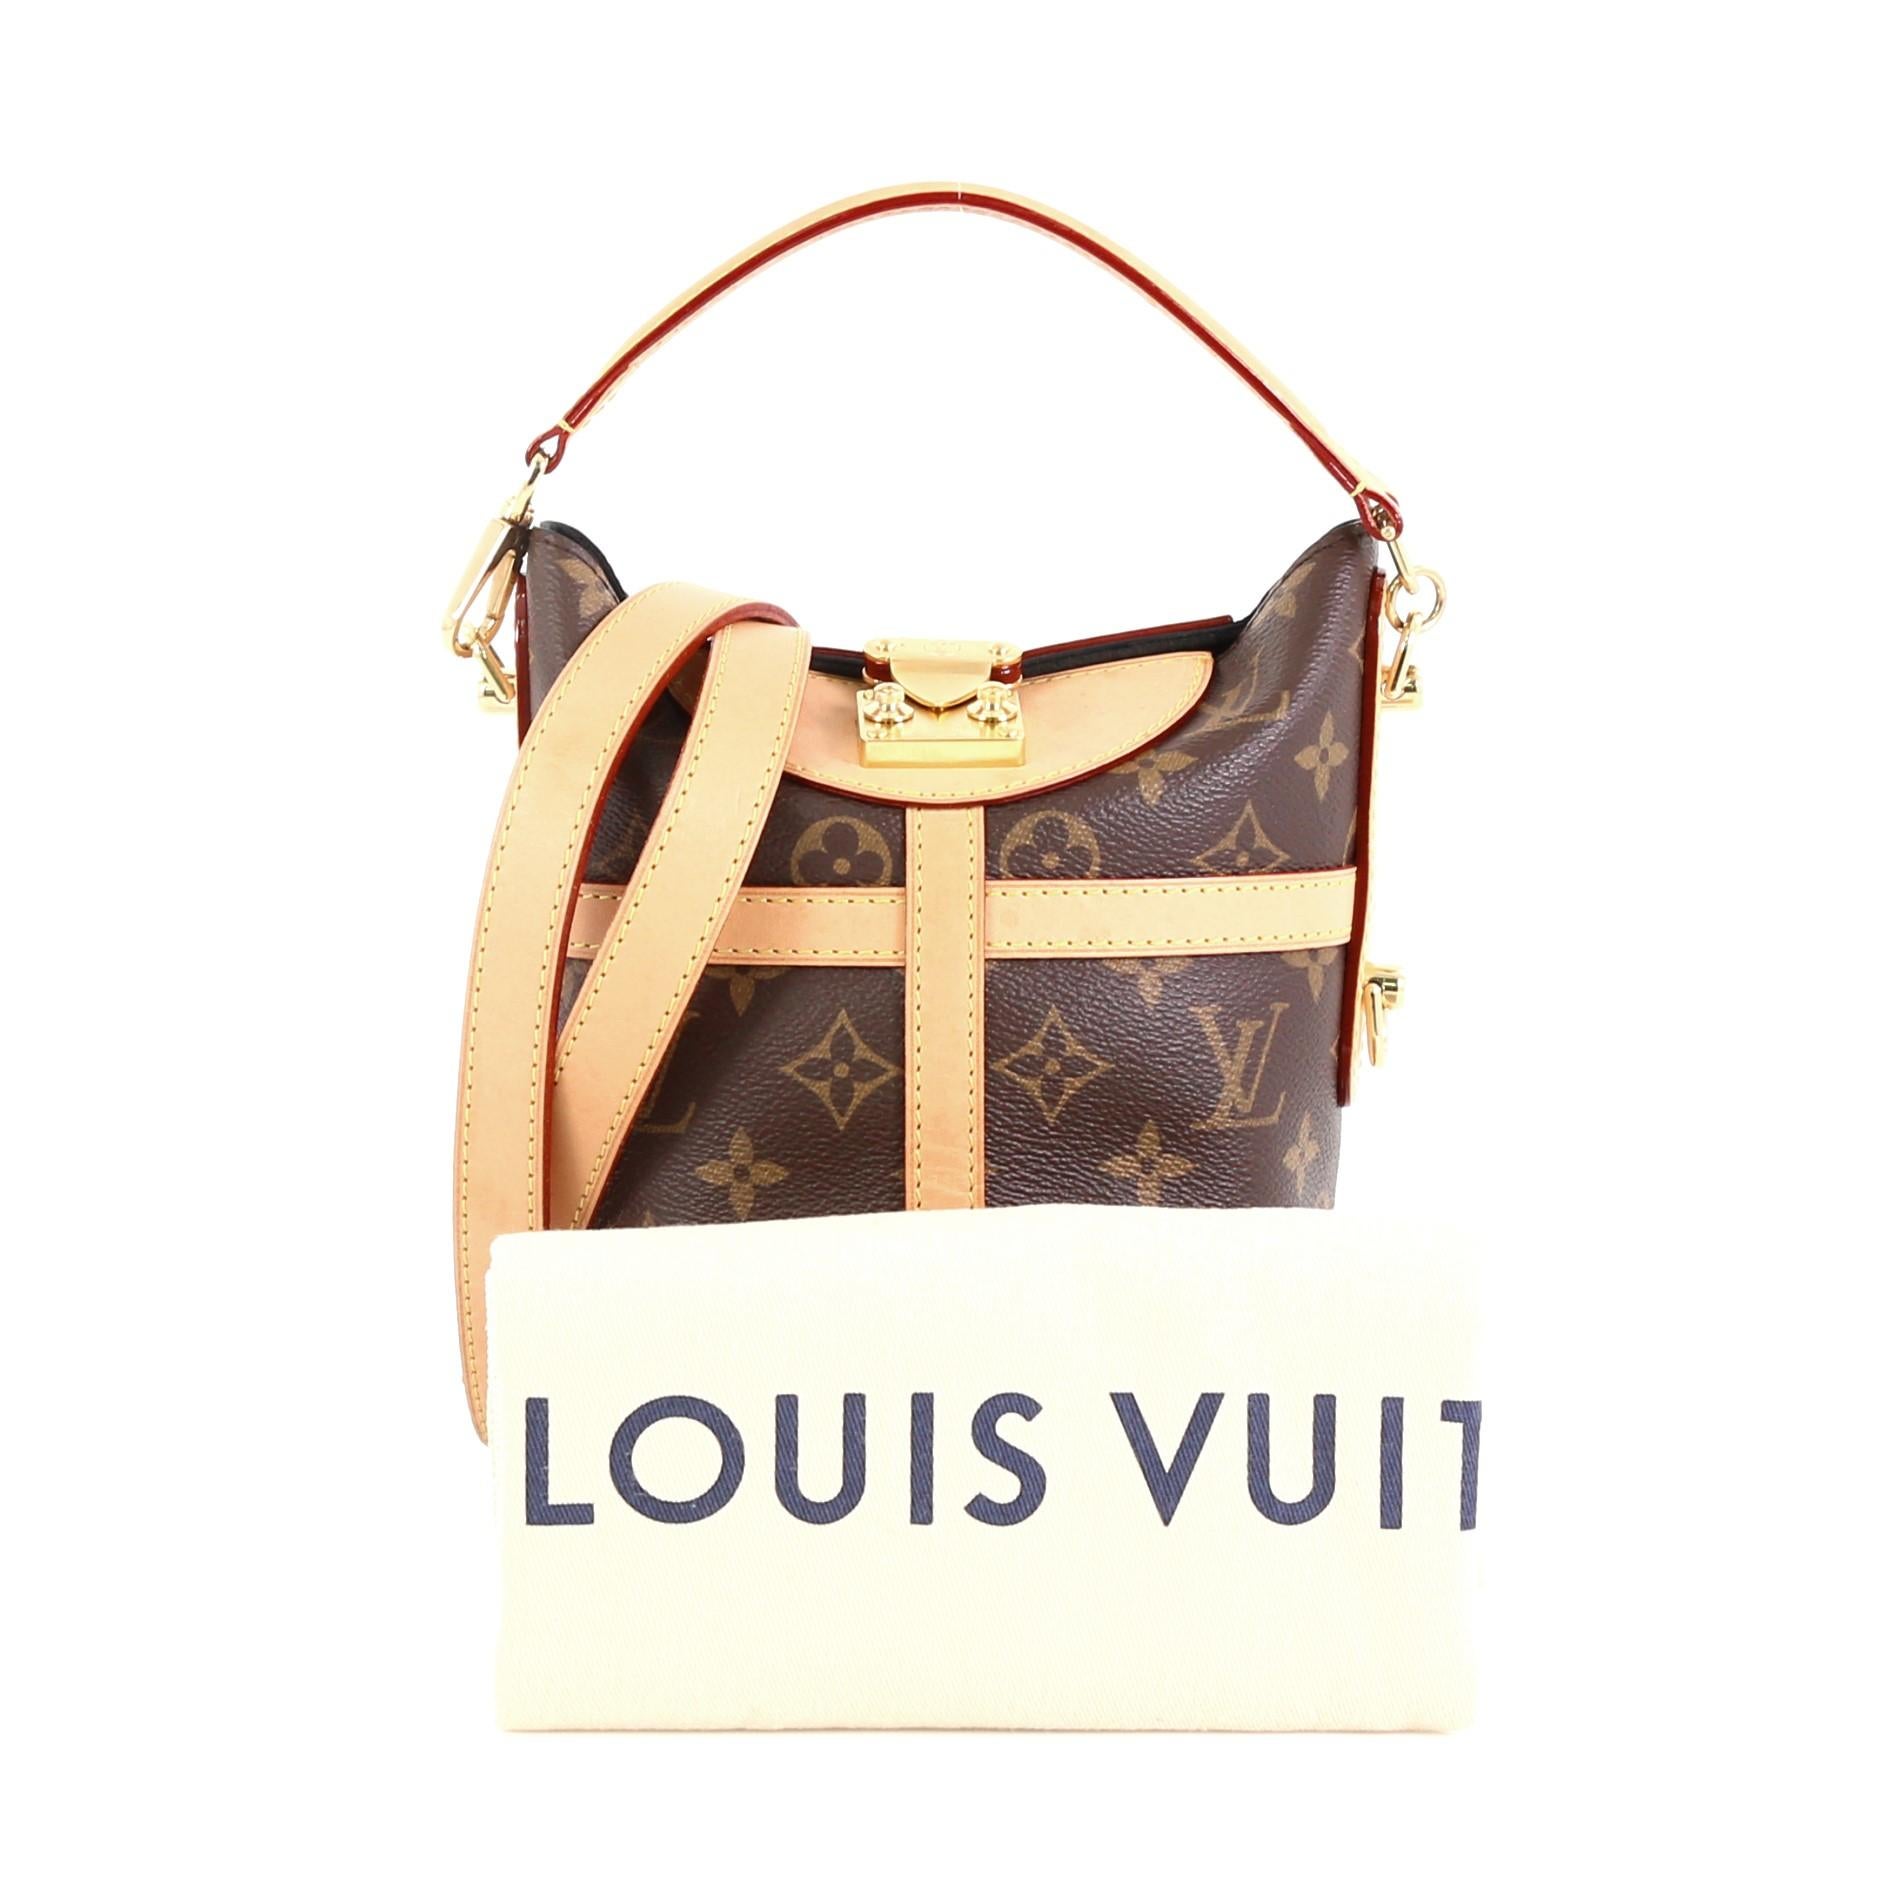 This Louis Vuitton Duffle Handbag Monogram Canvas, crafted from brown monogram coated canvas, features a detachable top handle, detachable shoulder strap, and gold-tone hardware. Its s-lock closure opens to a black microfiber interior with slip